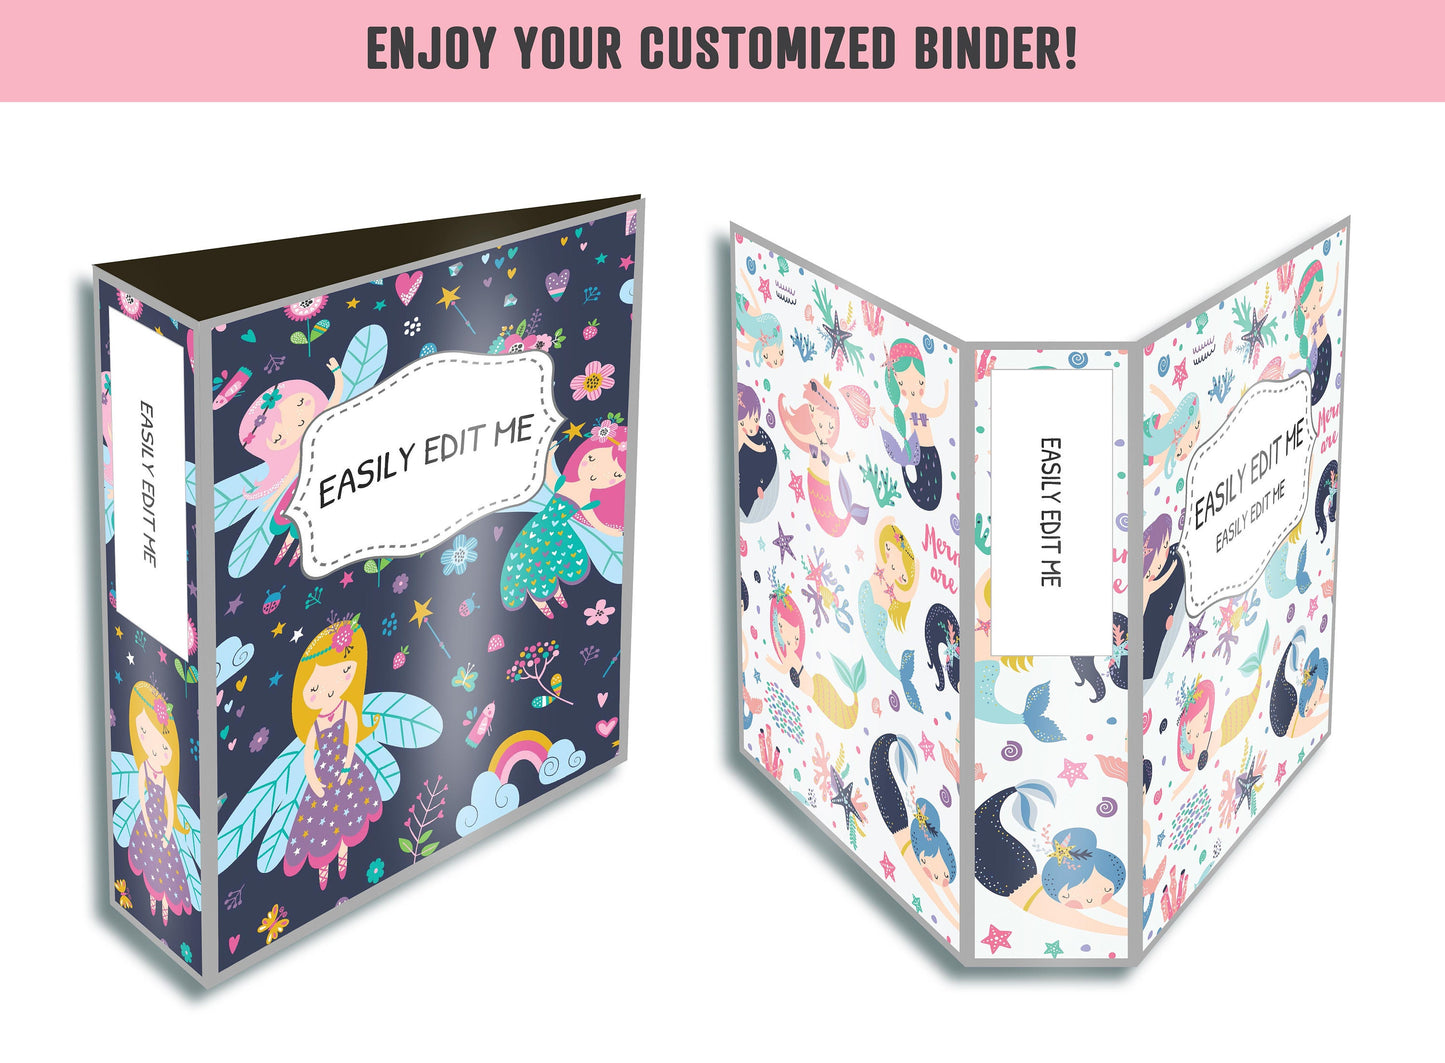 Binder Cover for Girls, 10 Editable Covers+Spines, Teacher/School Binder Template, Planner Cover, Binder Inserts, Printable Binder Cover